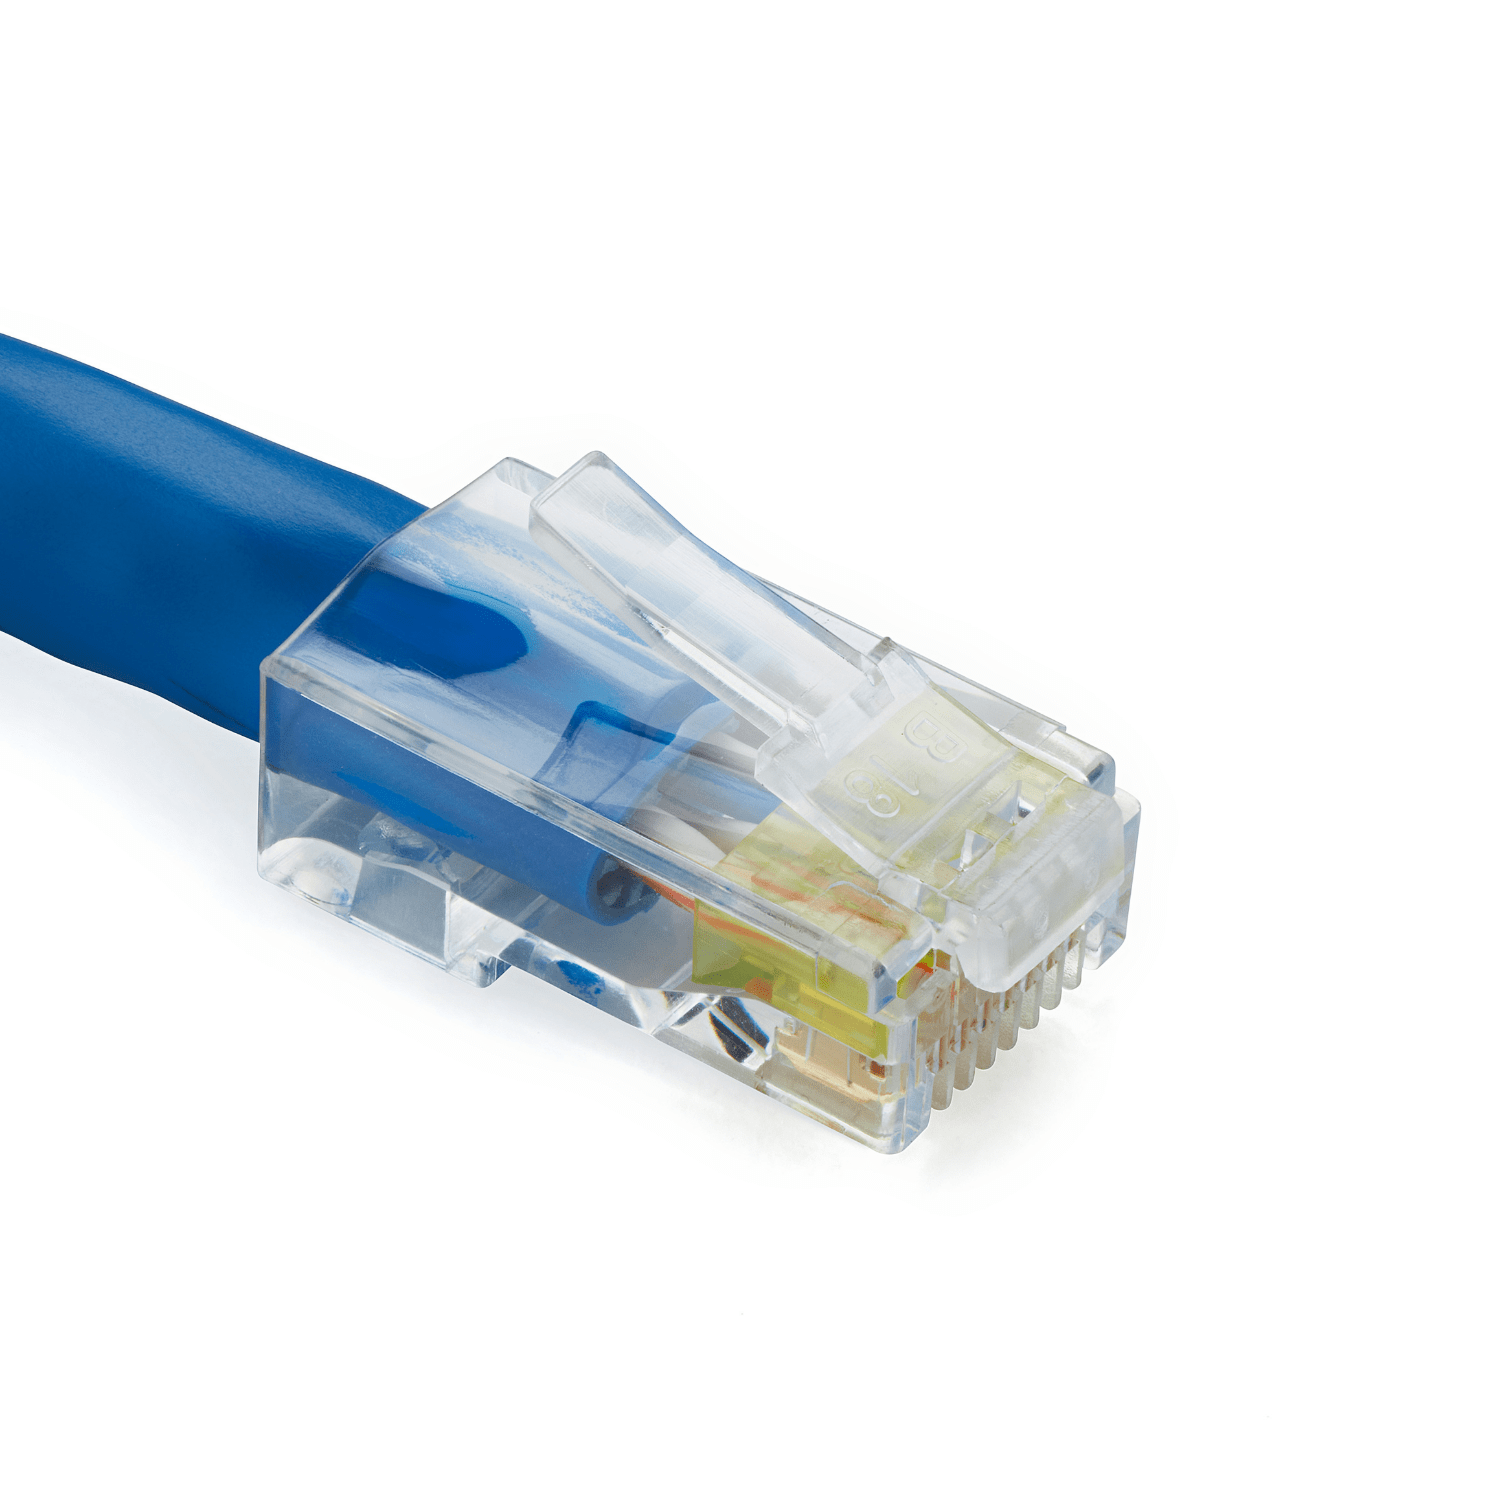 Difference Between RJ45 and CAT6 Cables.